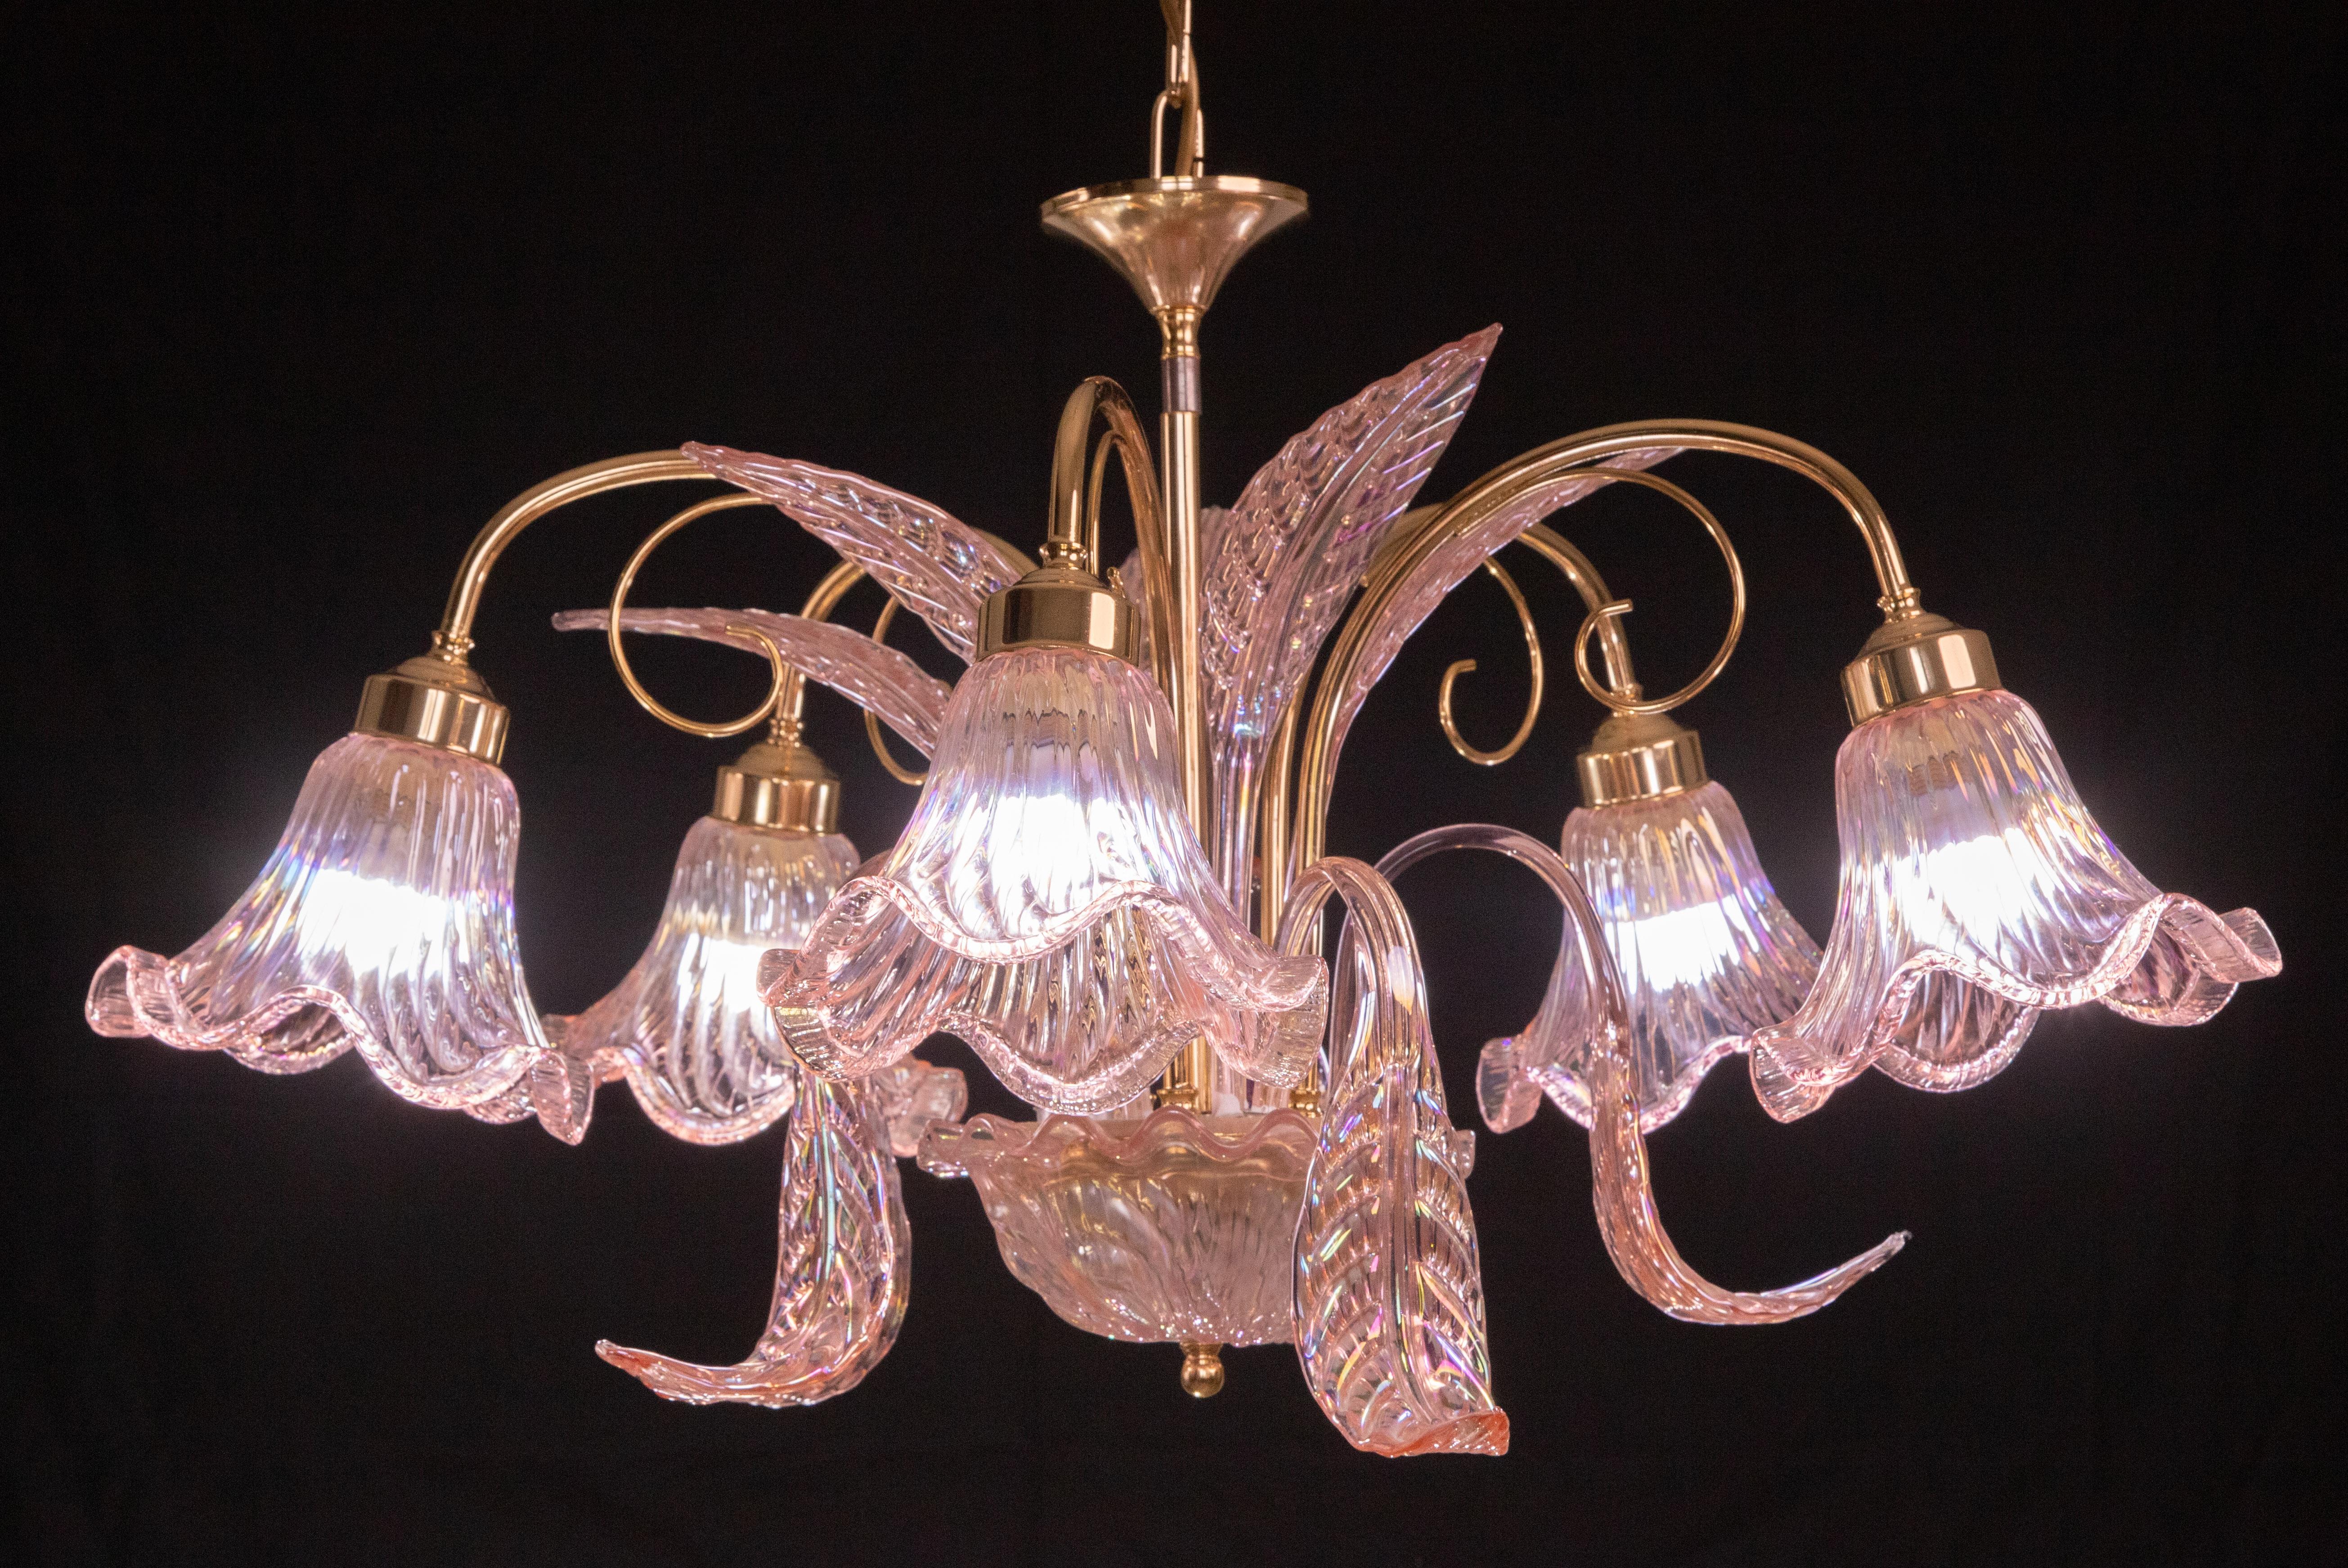 Spectacular Murano chandelier in rare iridescent pink glass.

The chandelier consists of 5 arms with 5 e14 light points, plus 10 decorative leaves, five down and five up.

The structure of the chandelier is in gold bath and in excellent